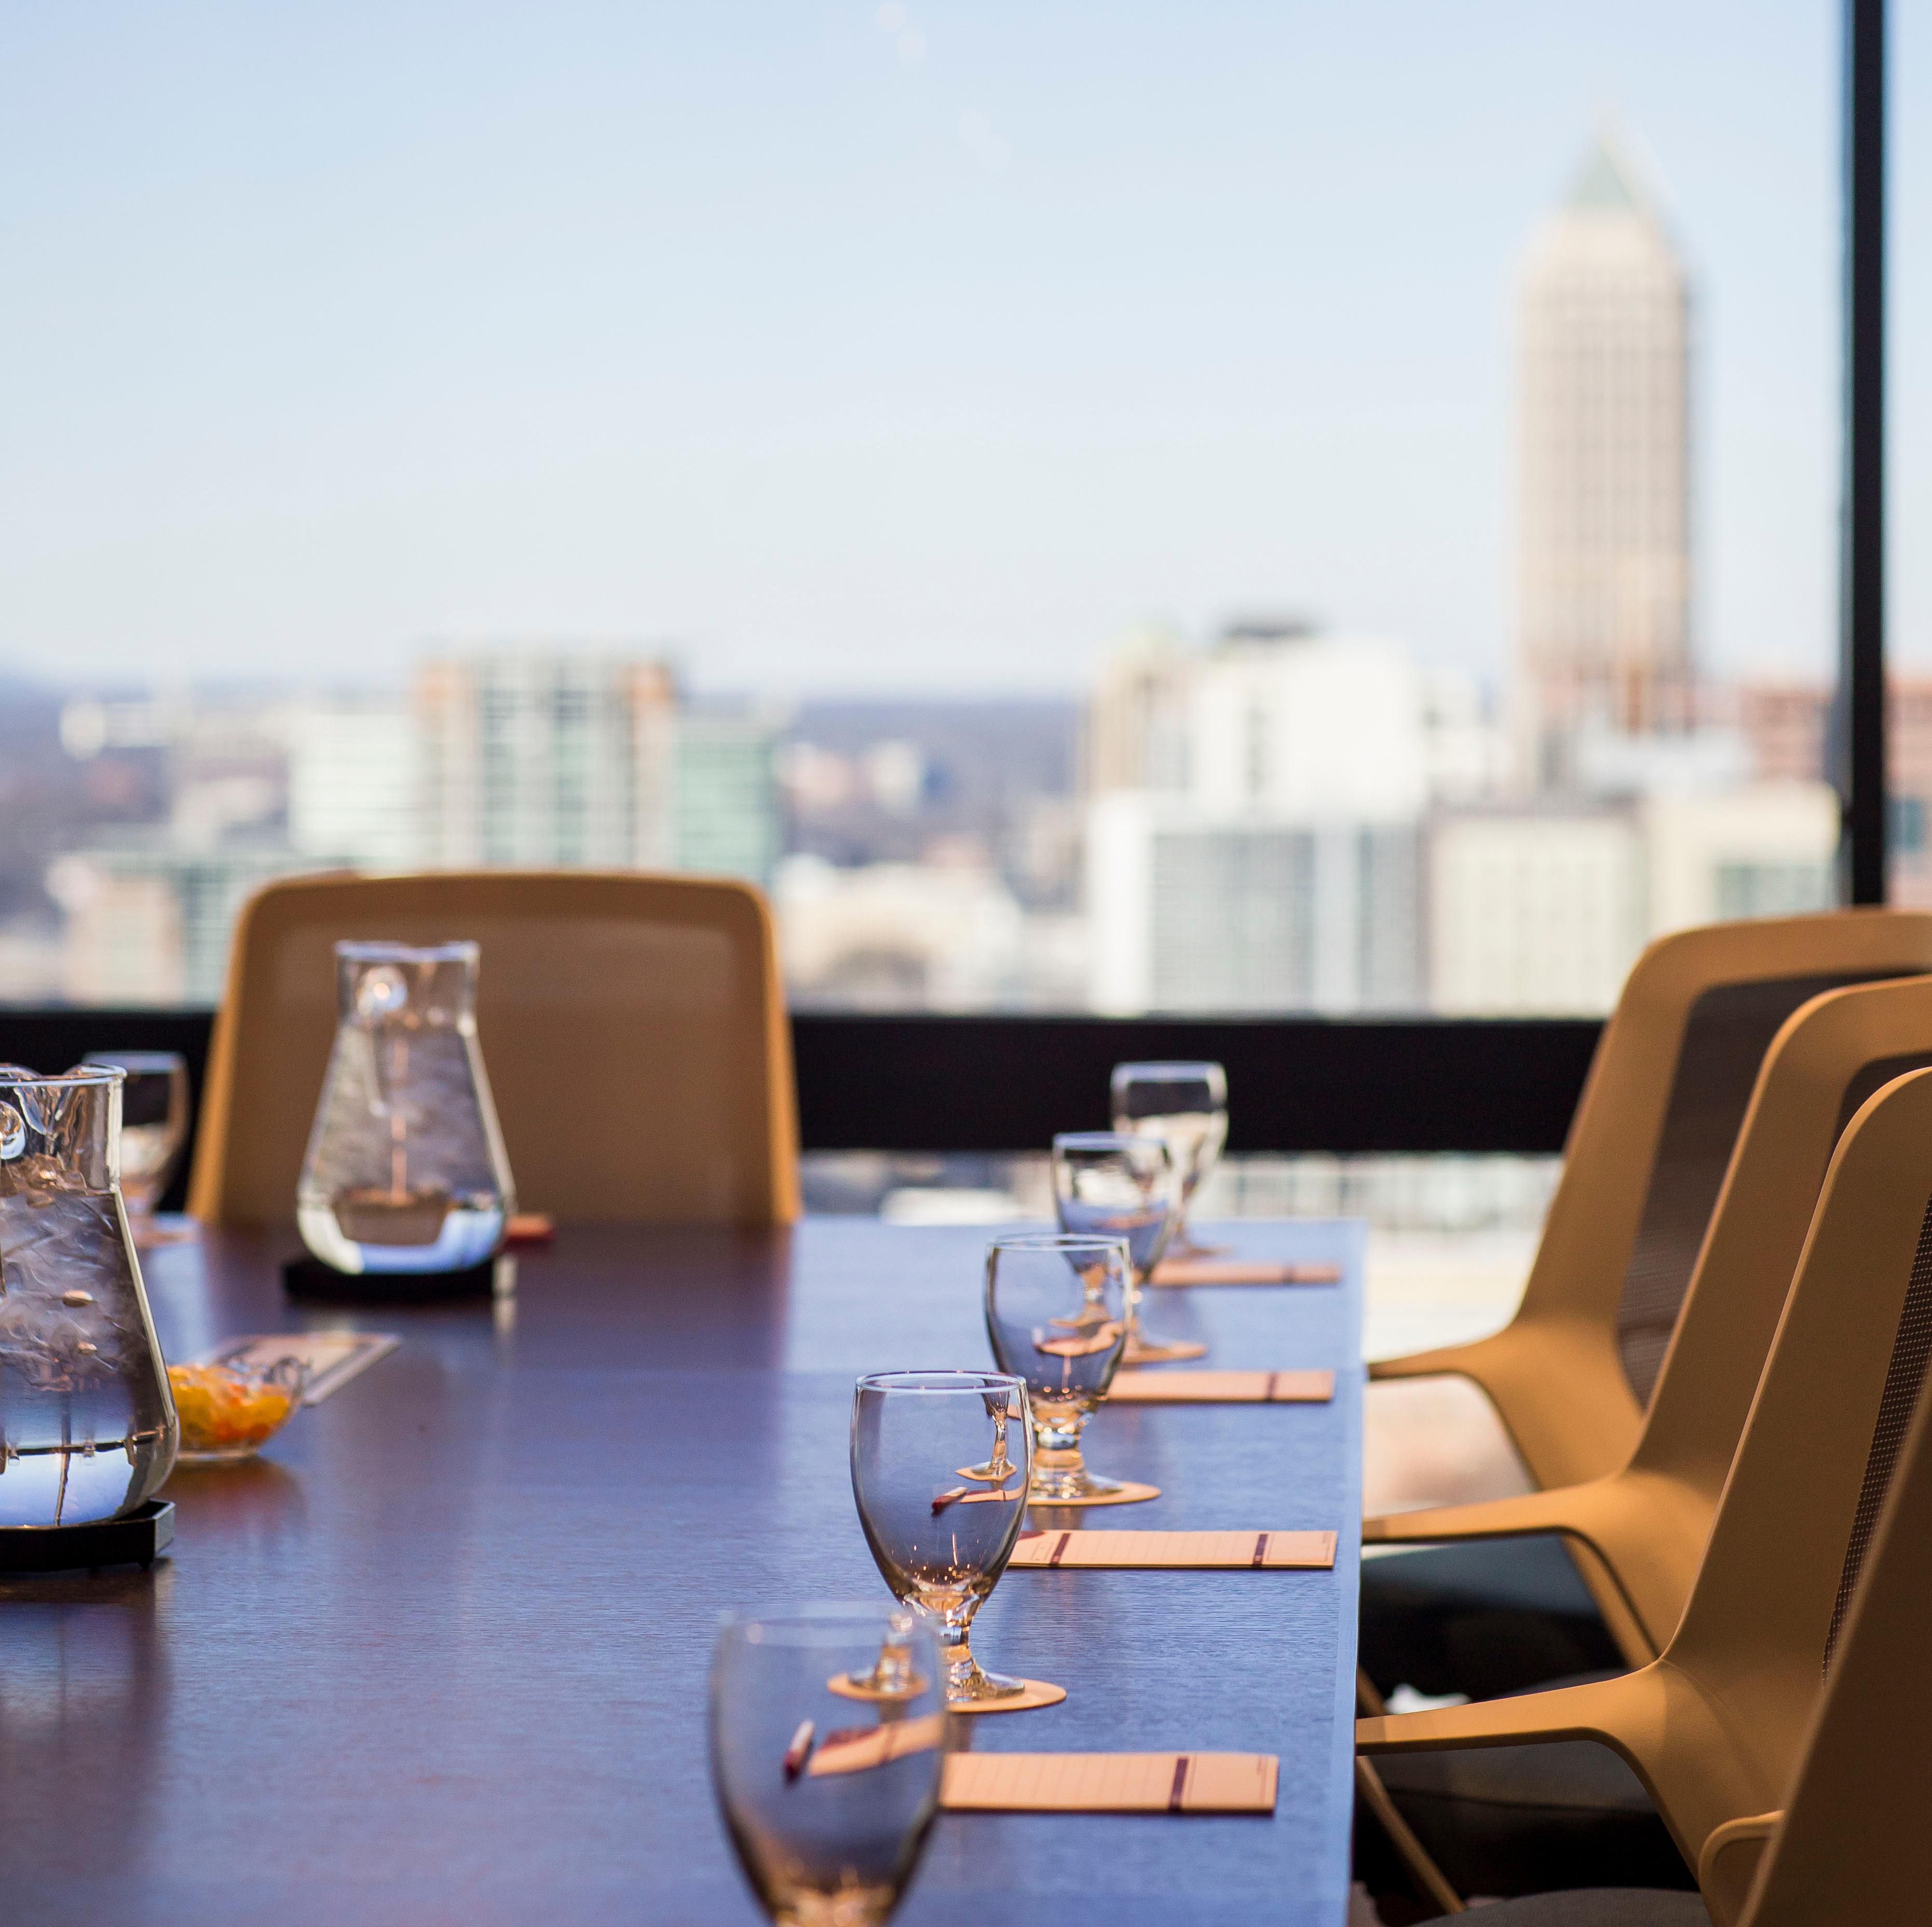 SKY Boardroom with an incredible view of Atlanta.